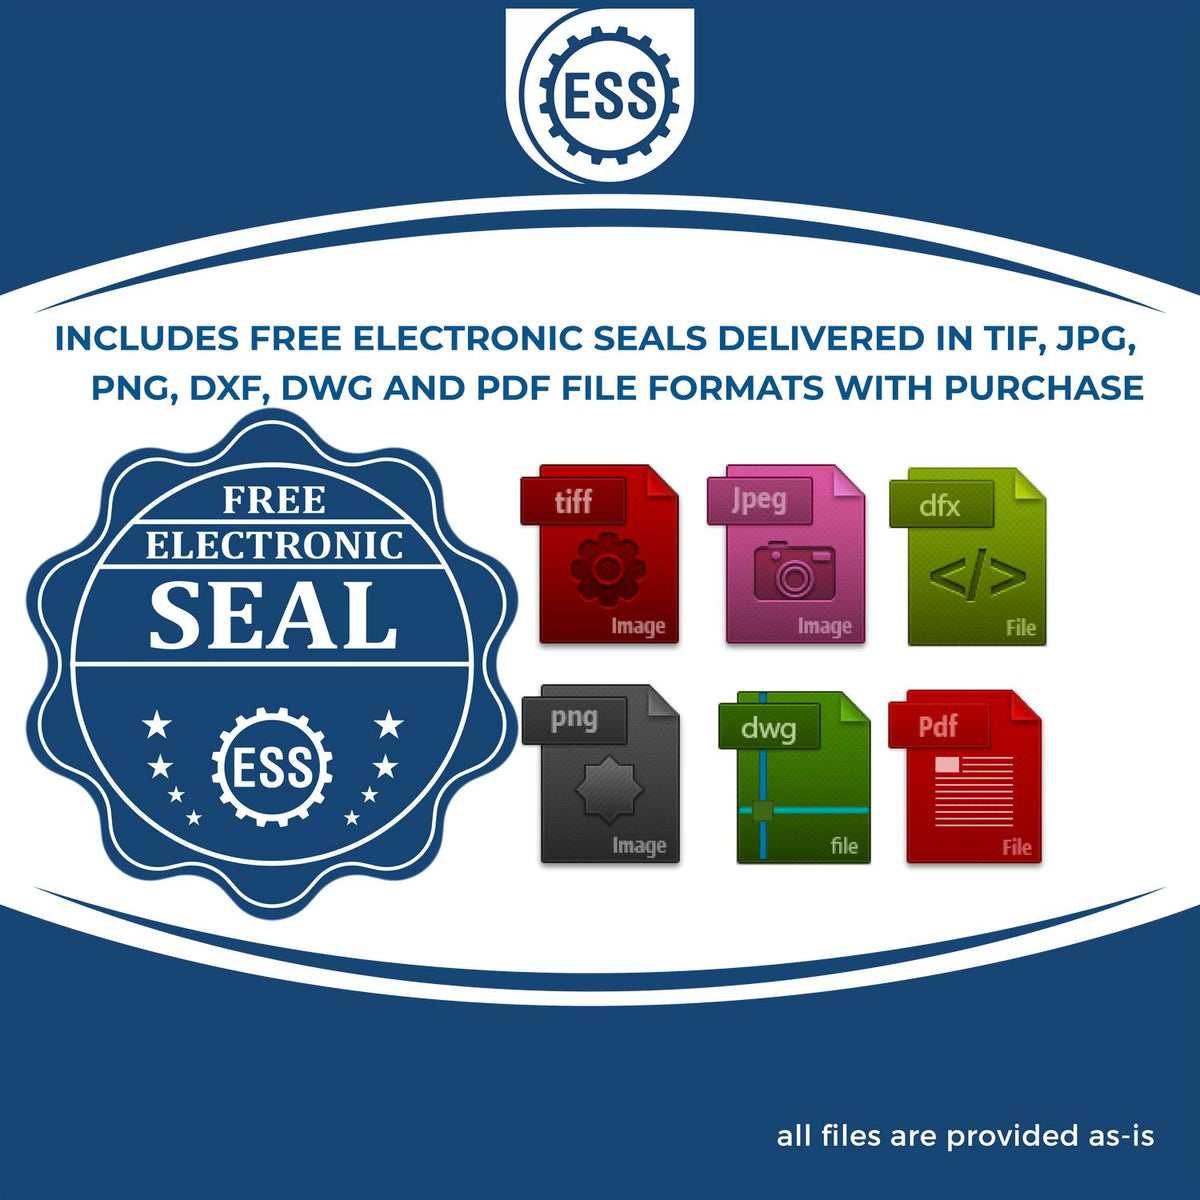 An infographic for the free electronic seal for the Long Reach Washington PE Seal illustrating the different file type icons such as DXF, DWG, TIF, JPG and PNG.